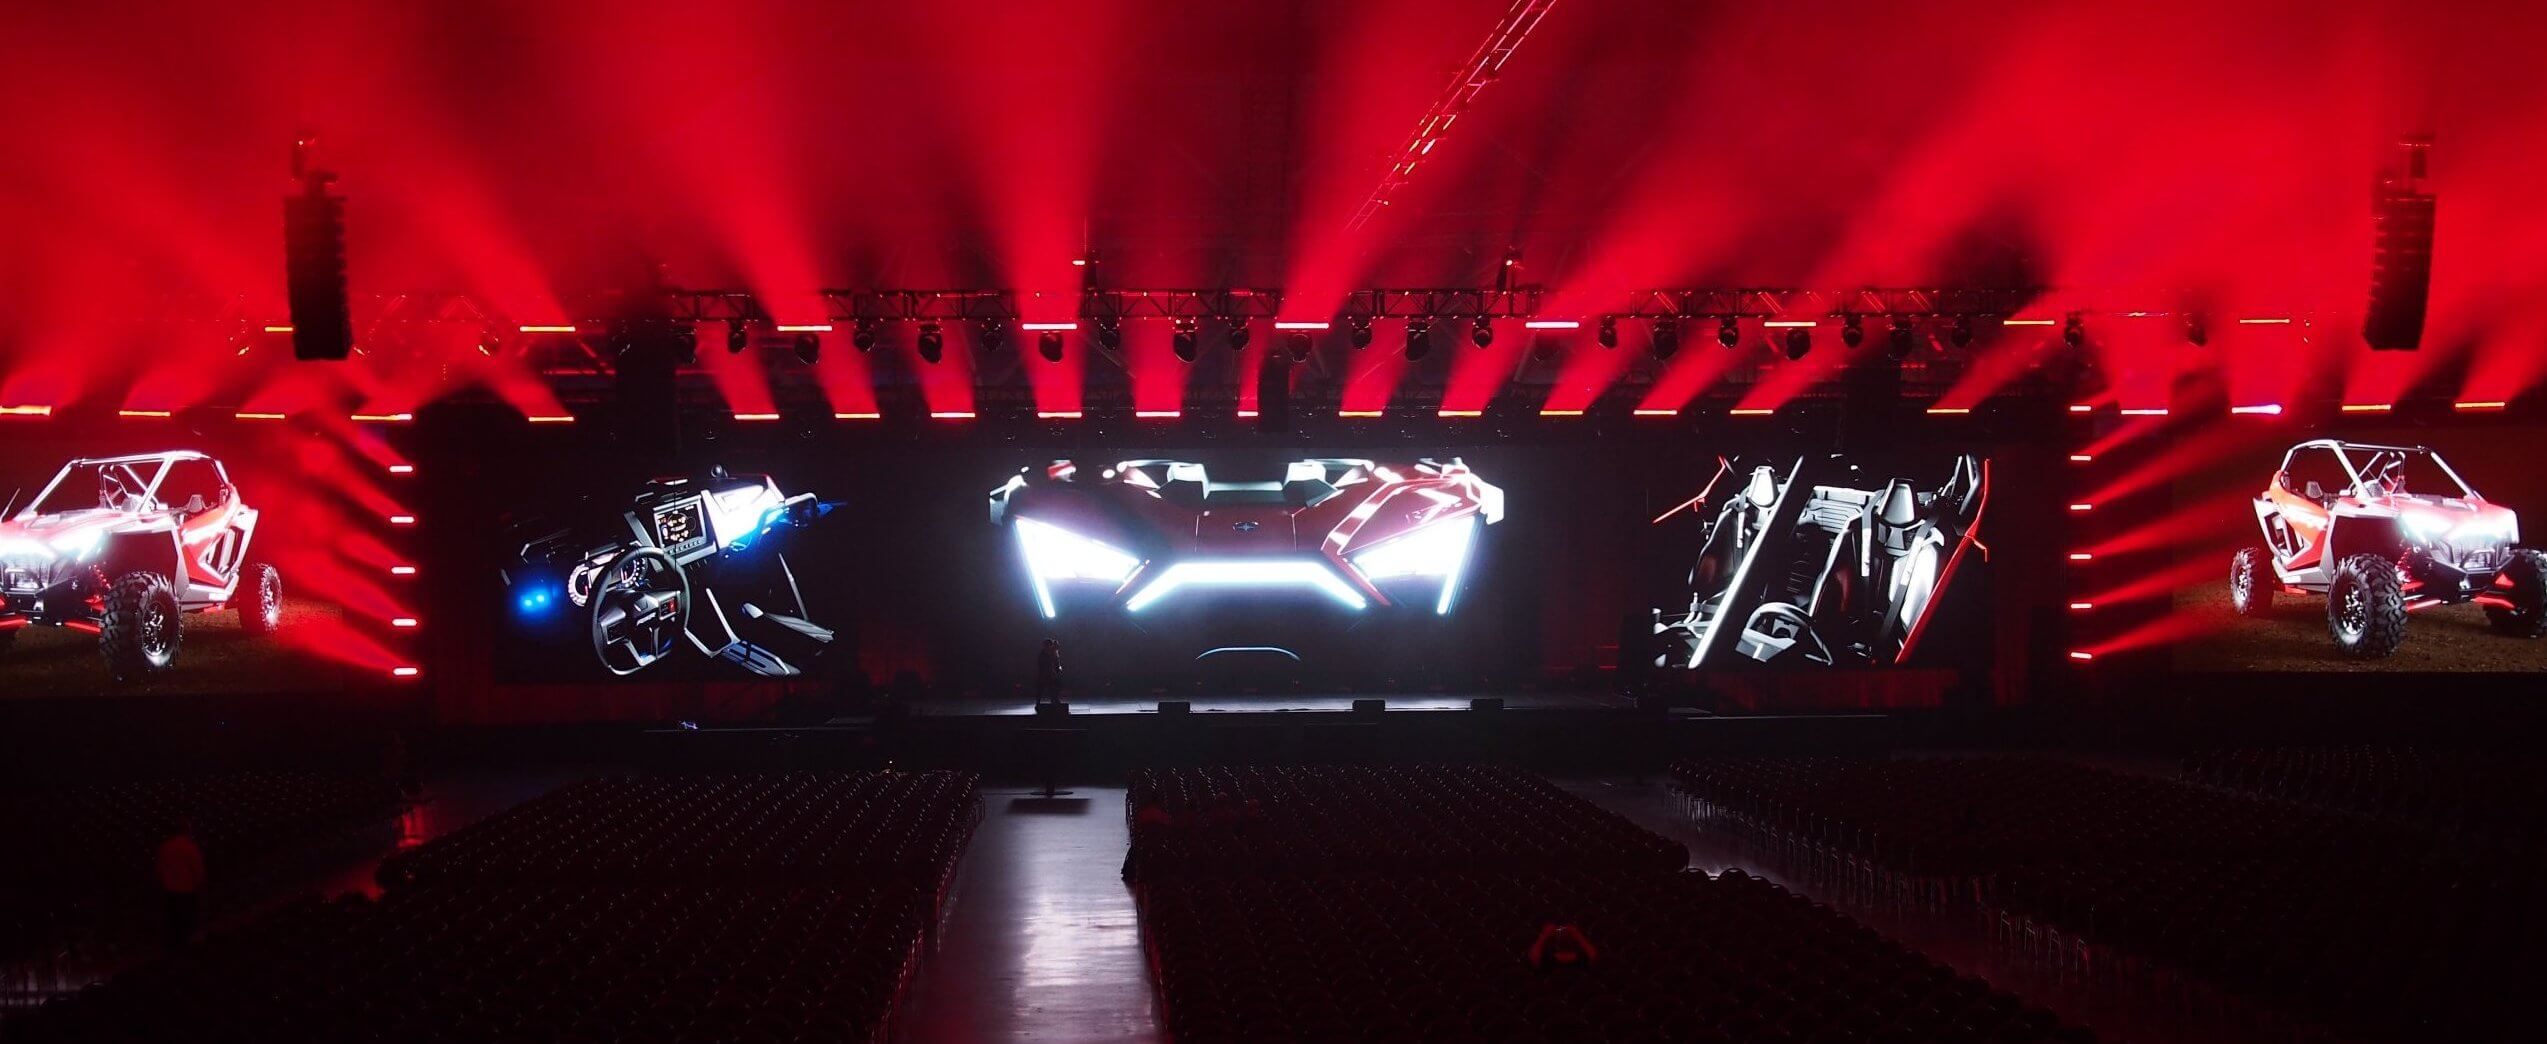 Full view of stage with red spotlights fanning out